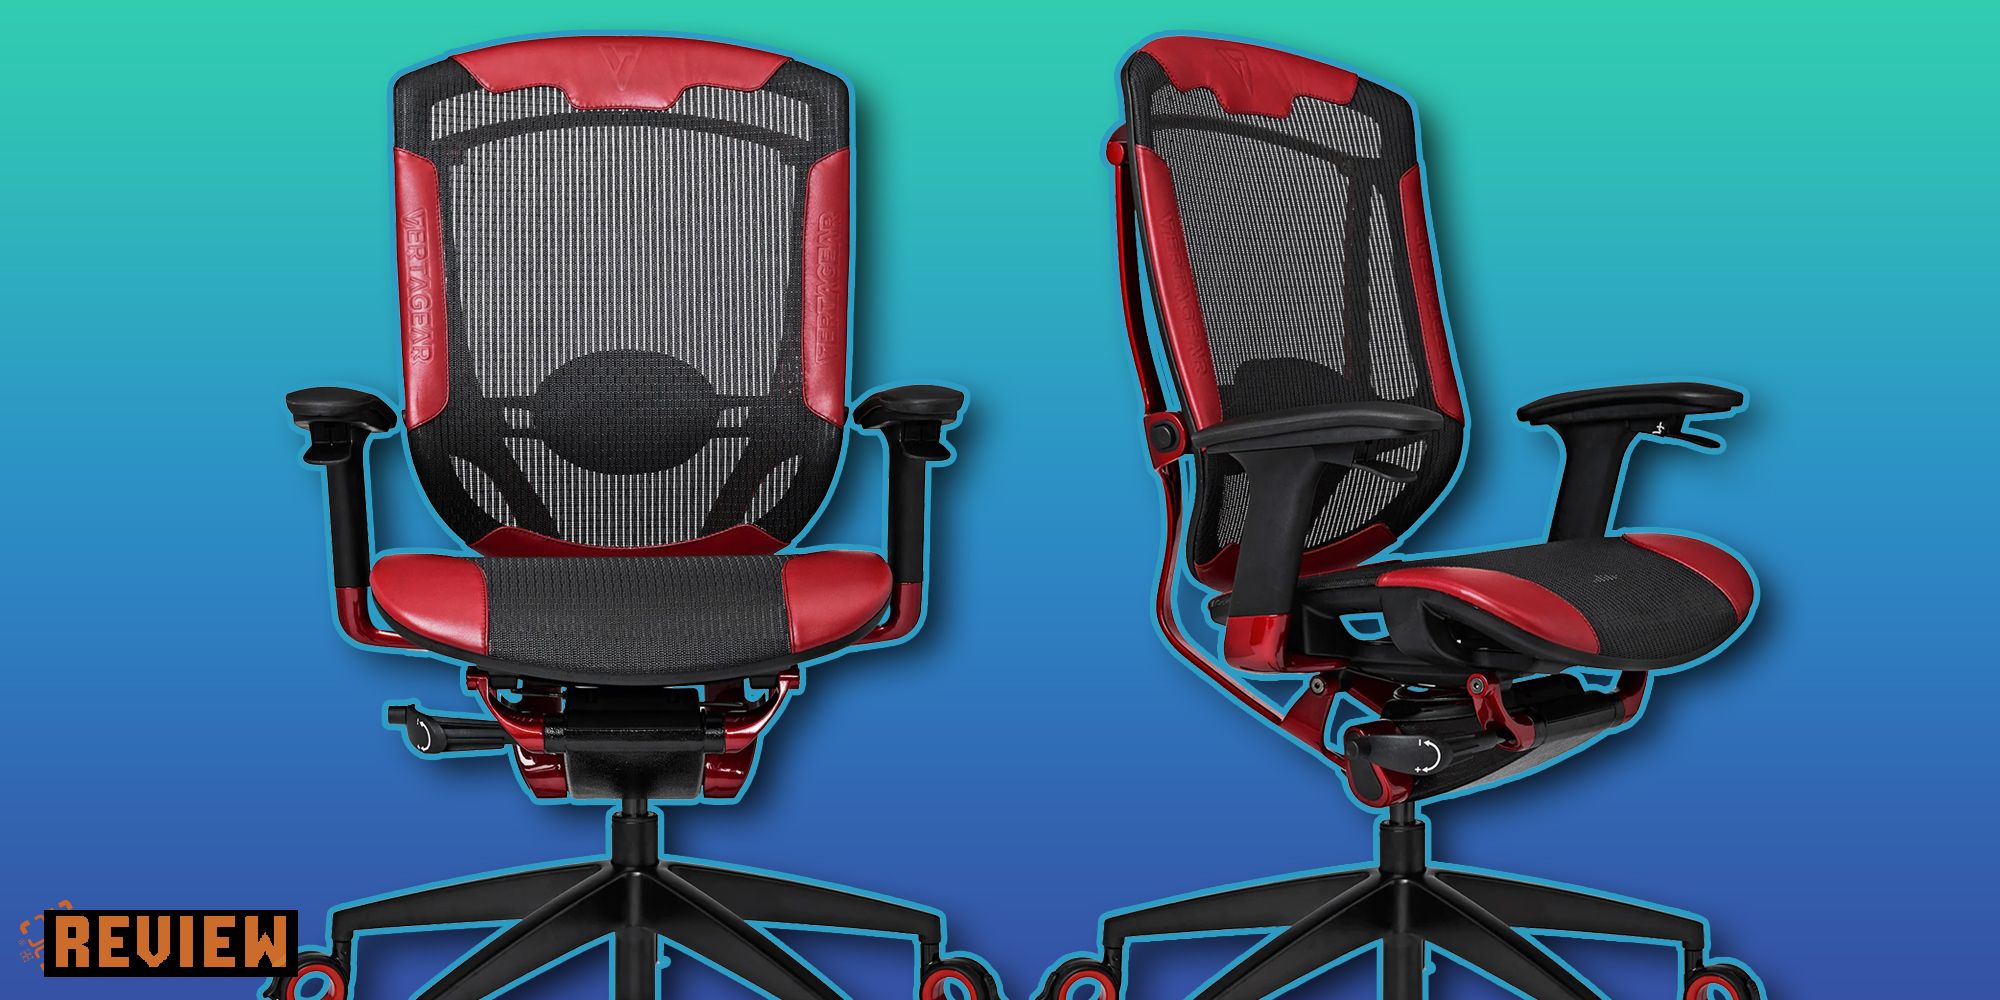 Produc images for Vertagear Triigger 350 SE Chair.